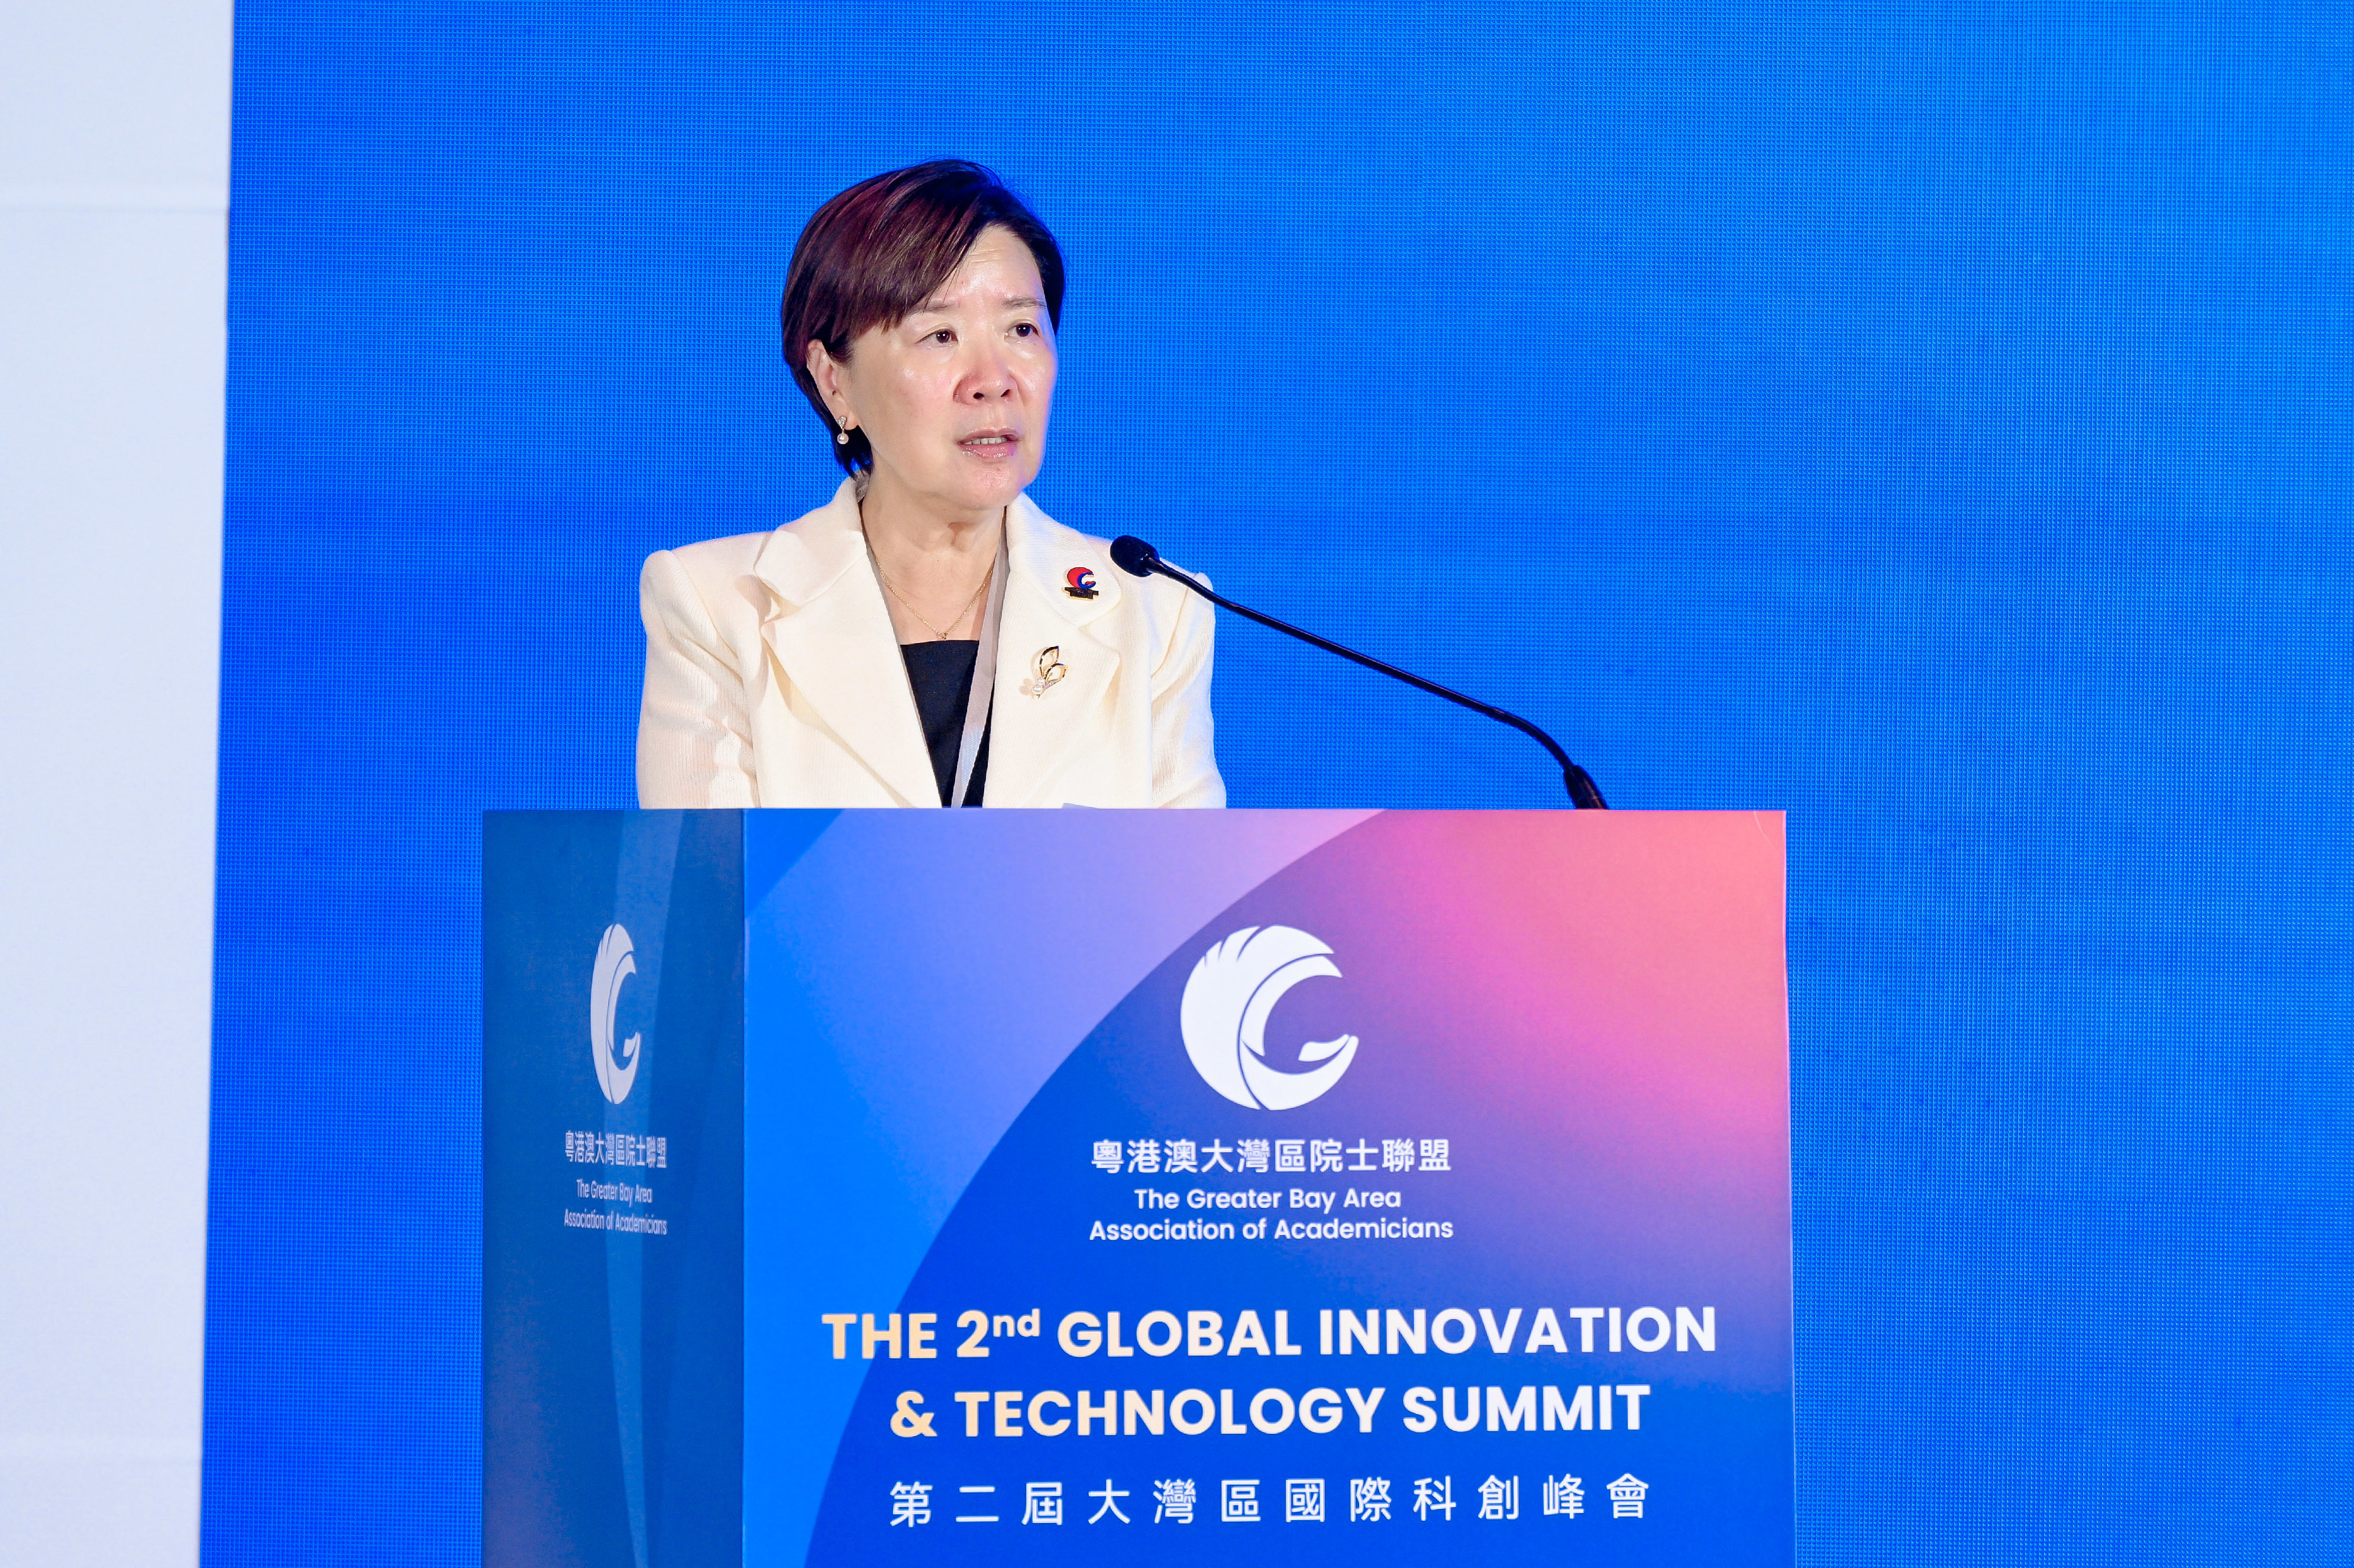 Council Chair of GBAAA and President of HKUST Prof. Nancy IP delivered the welcome remarks.